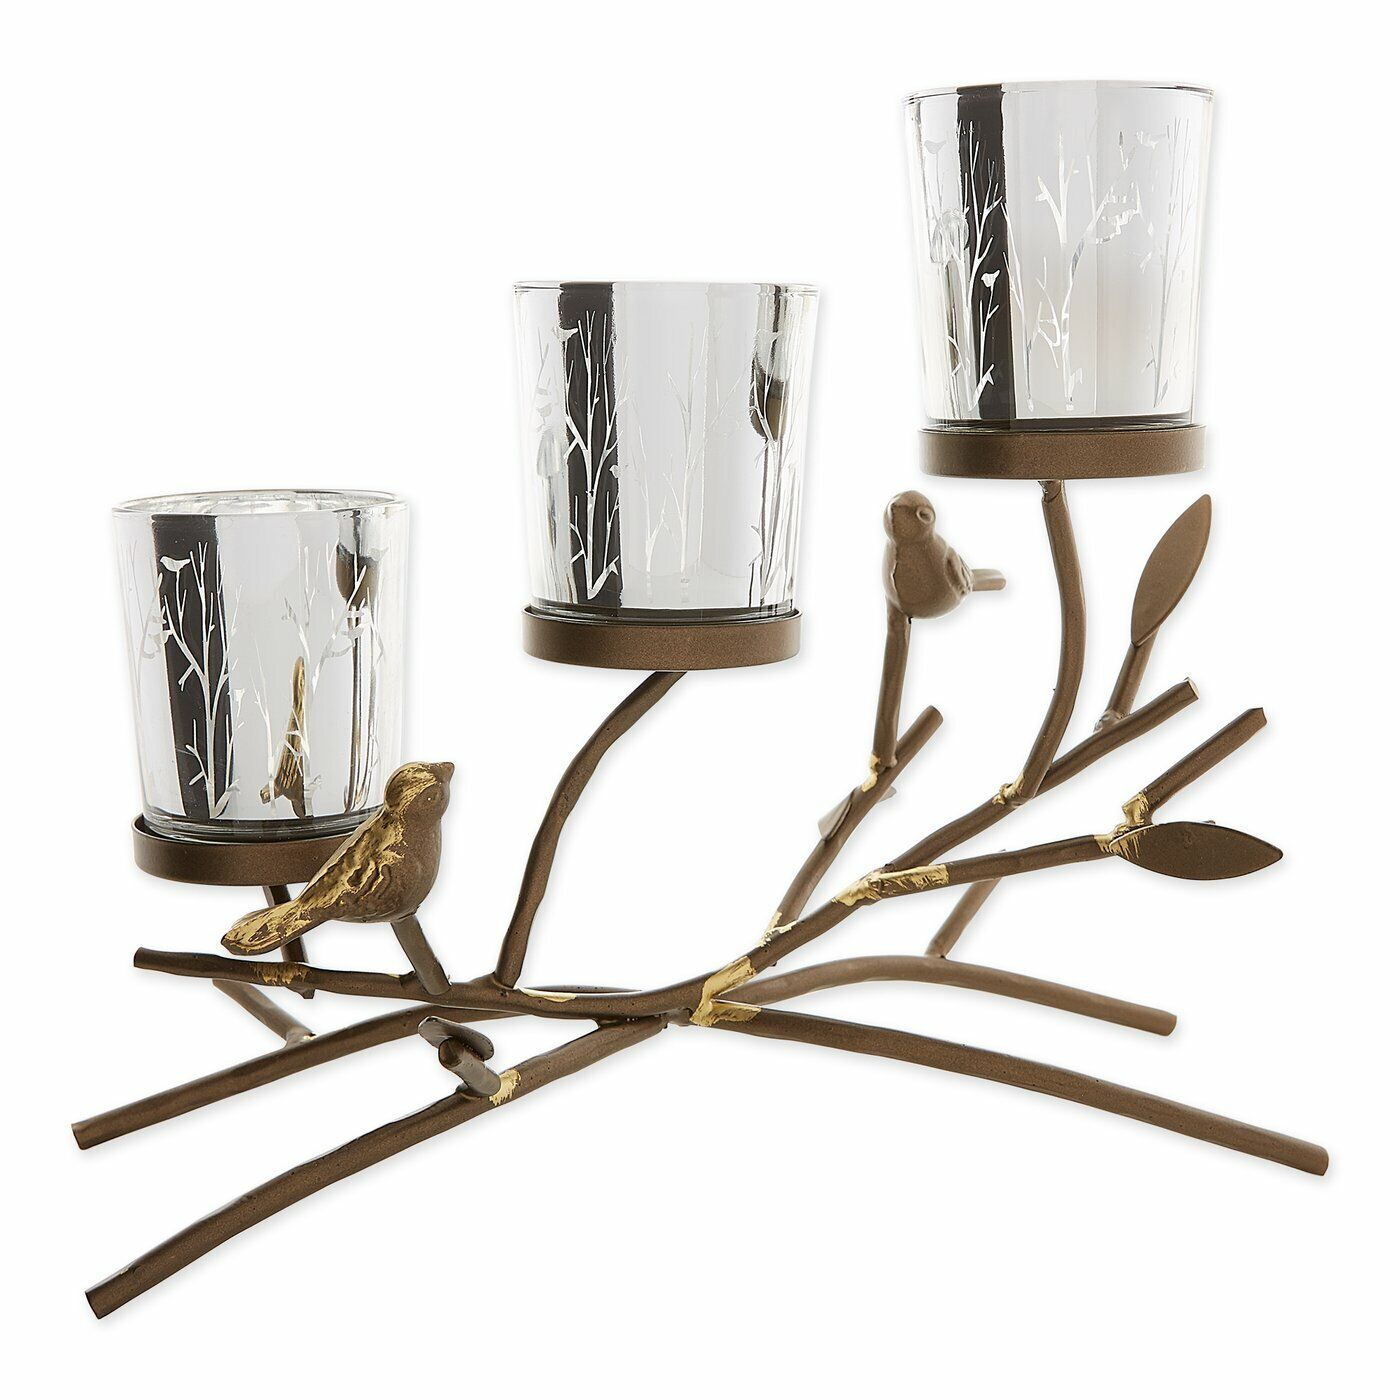 6 Sparkling Birds and Branches Three Tealight Candle Holder Wedding Centerpiece